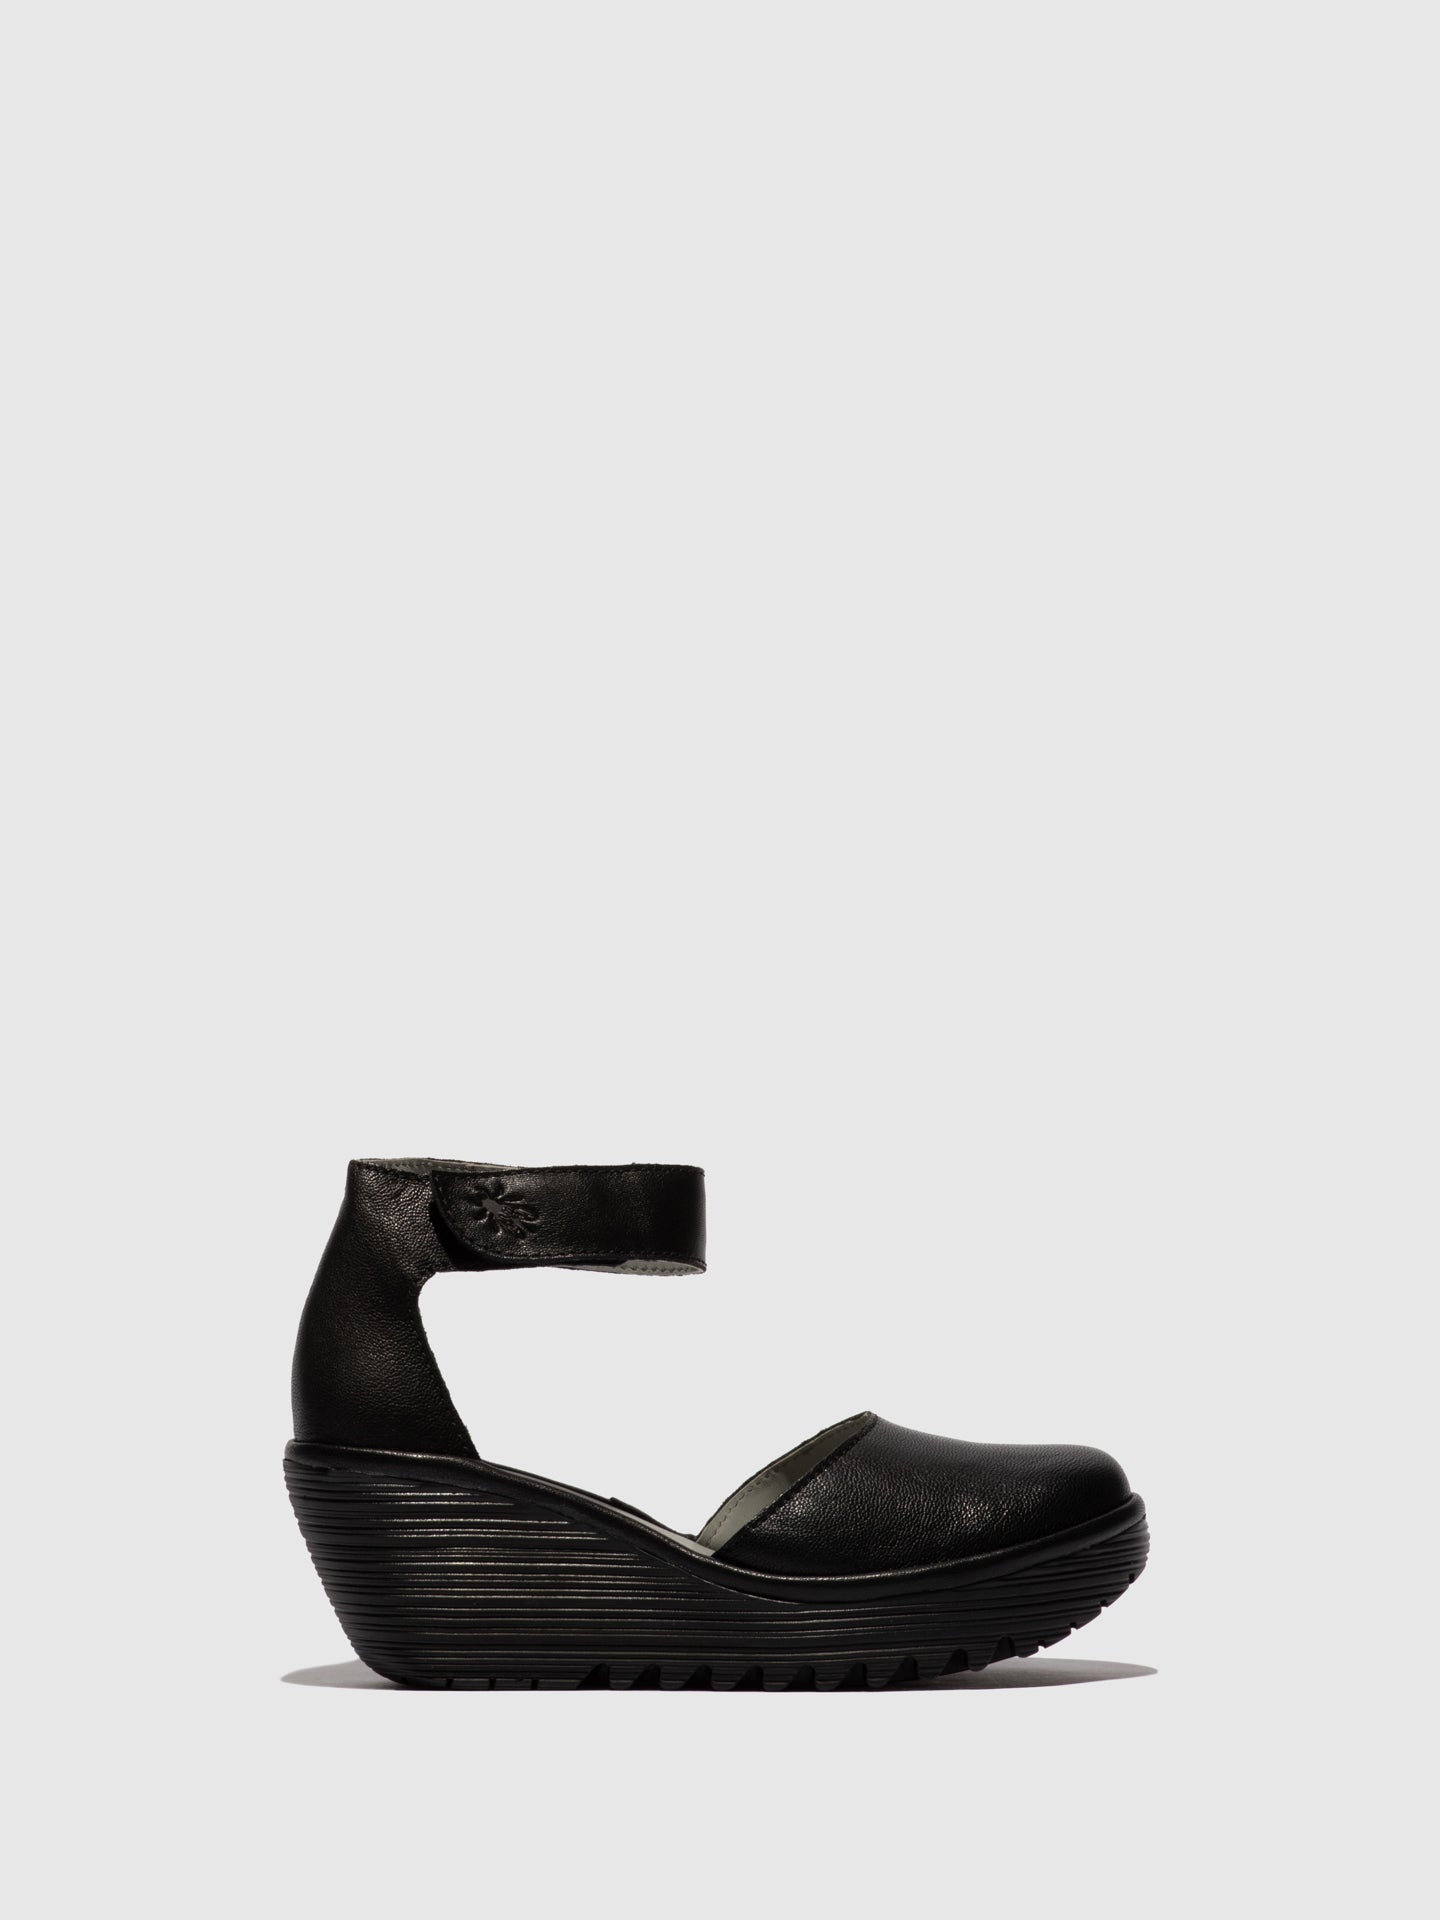 Fly London Ankle Strap Sandals YAND709FLY Black Leather